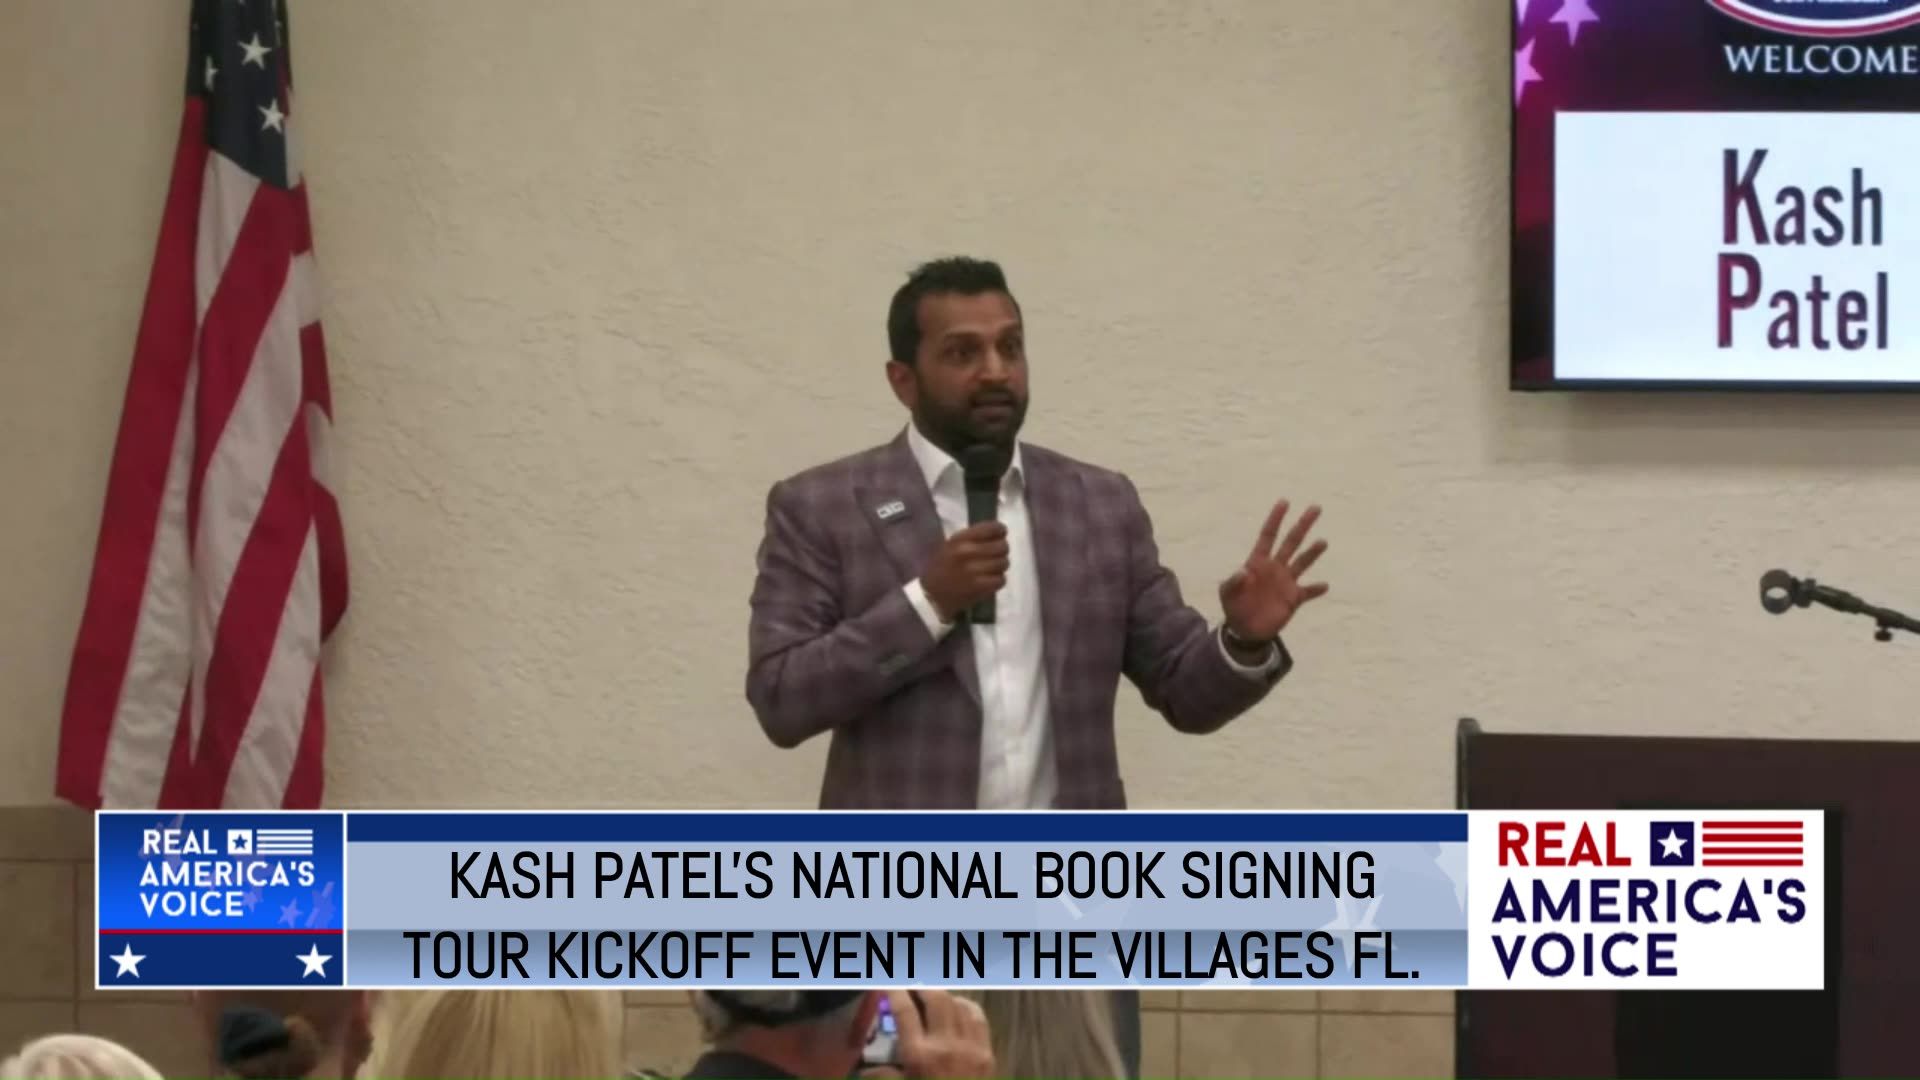 KASH PATEL'S GOVERNMENT GANGSTERS BOOK TOUR KICKOFF IN THE VILLAGES FL